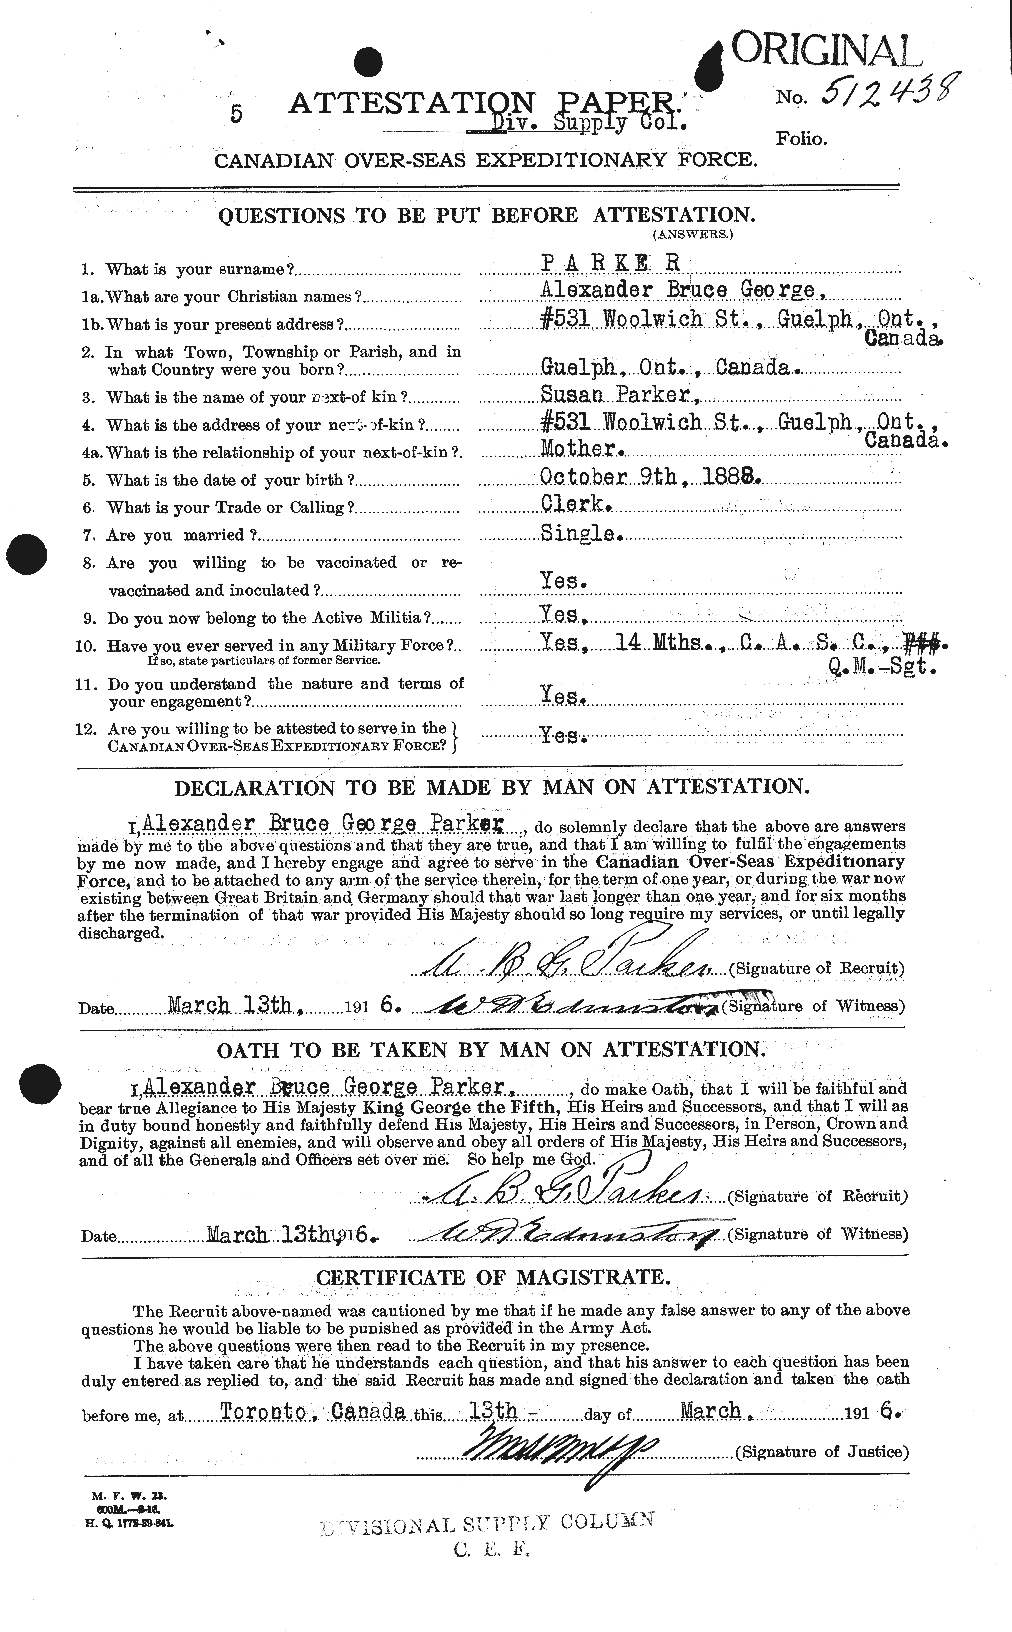 Personnel Records of the First World War - CEF 564972a